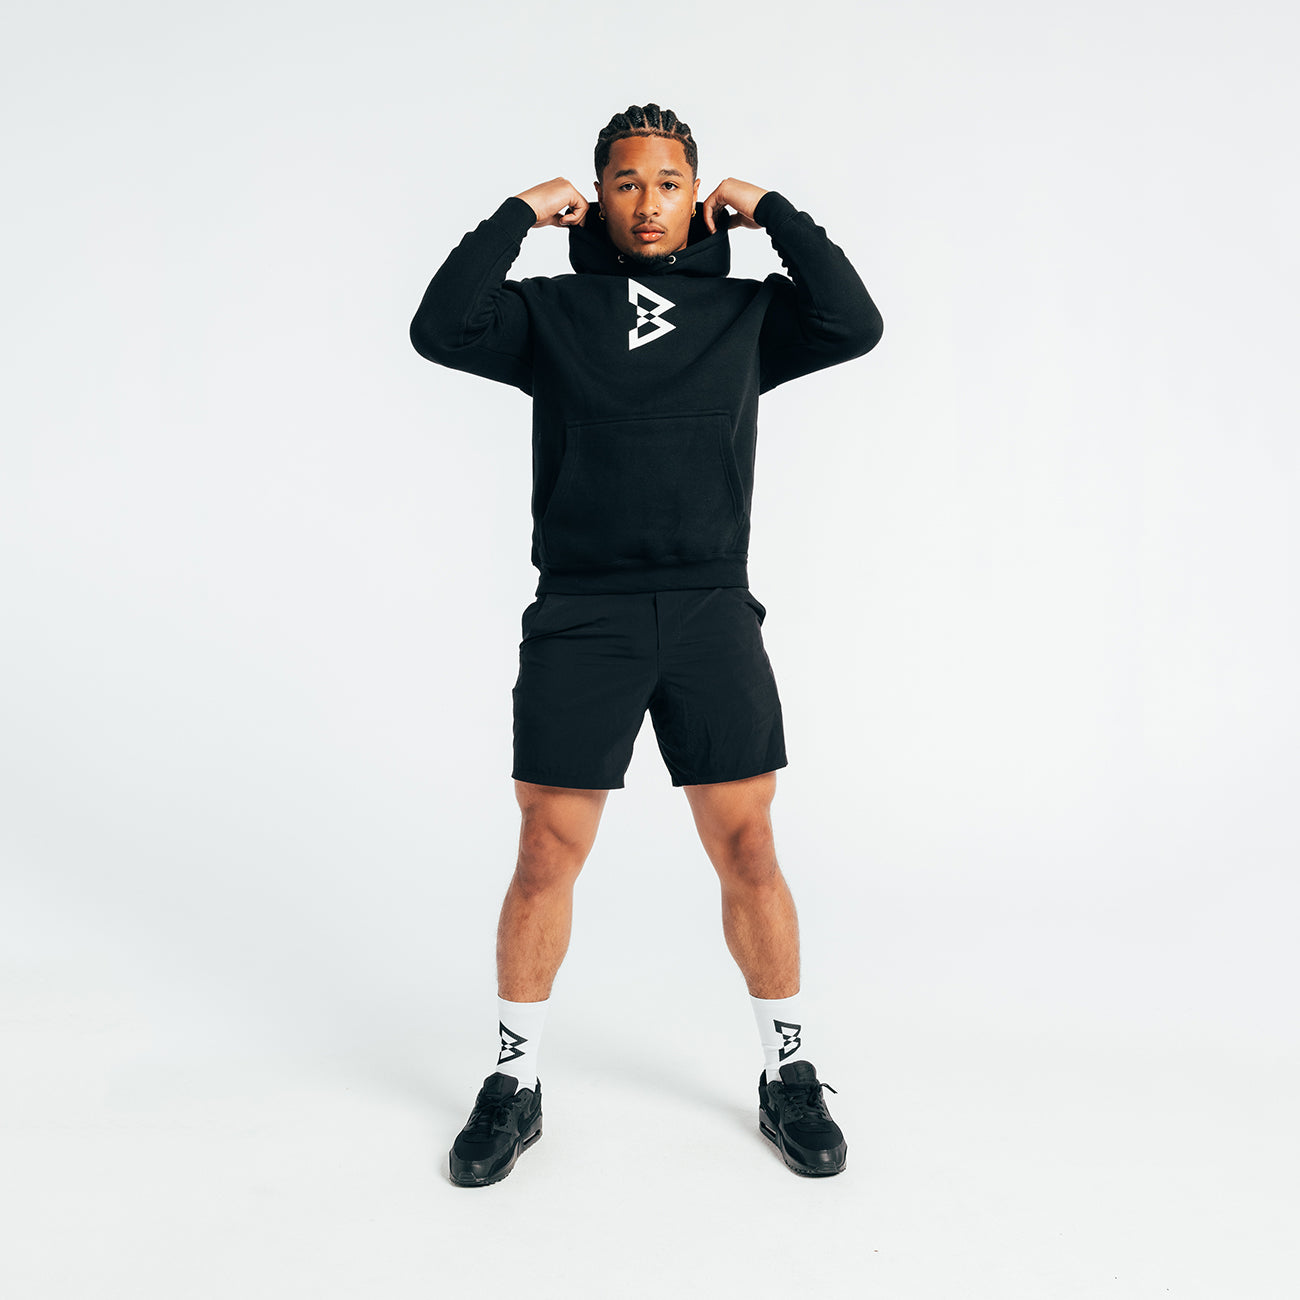 BeastMode Over and Over Hoodie - Unisex